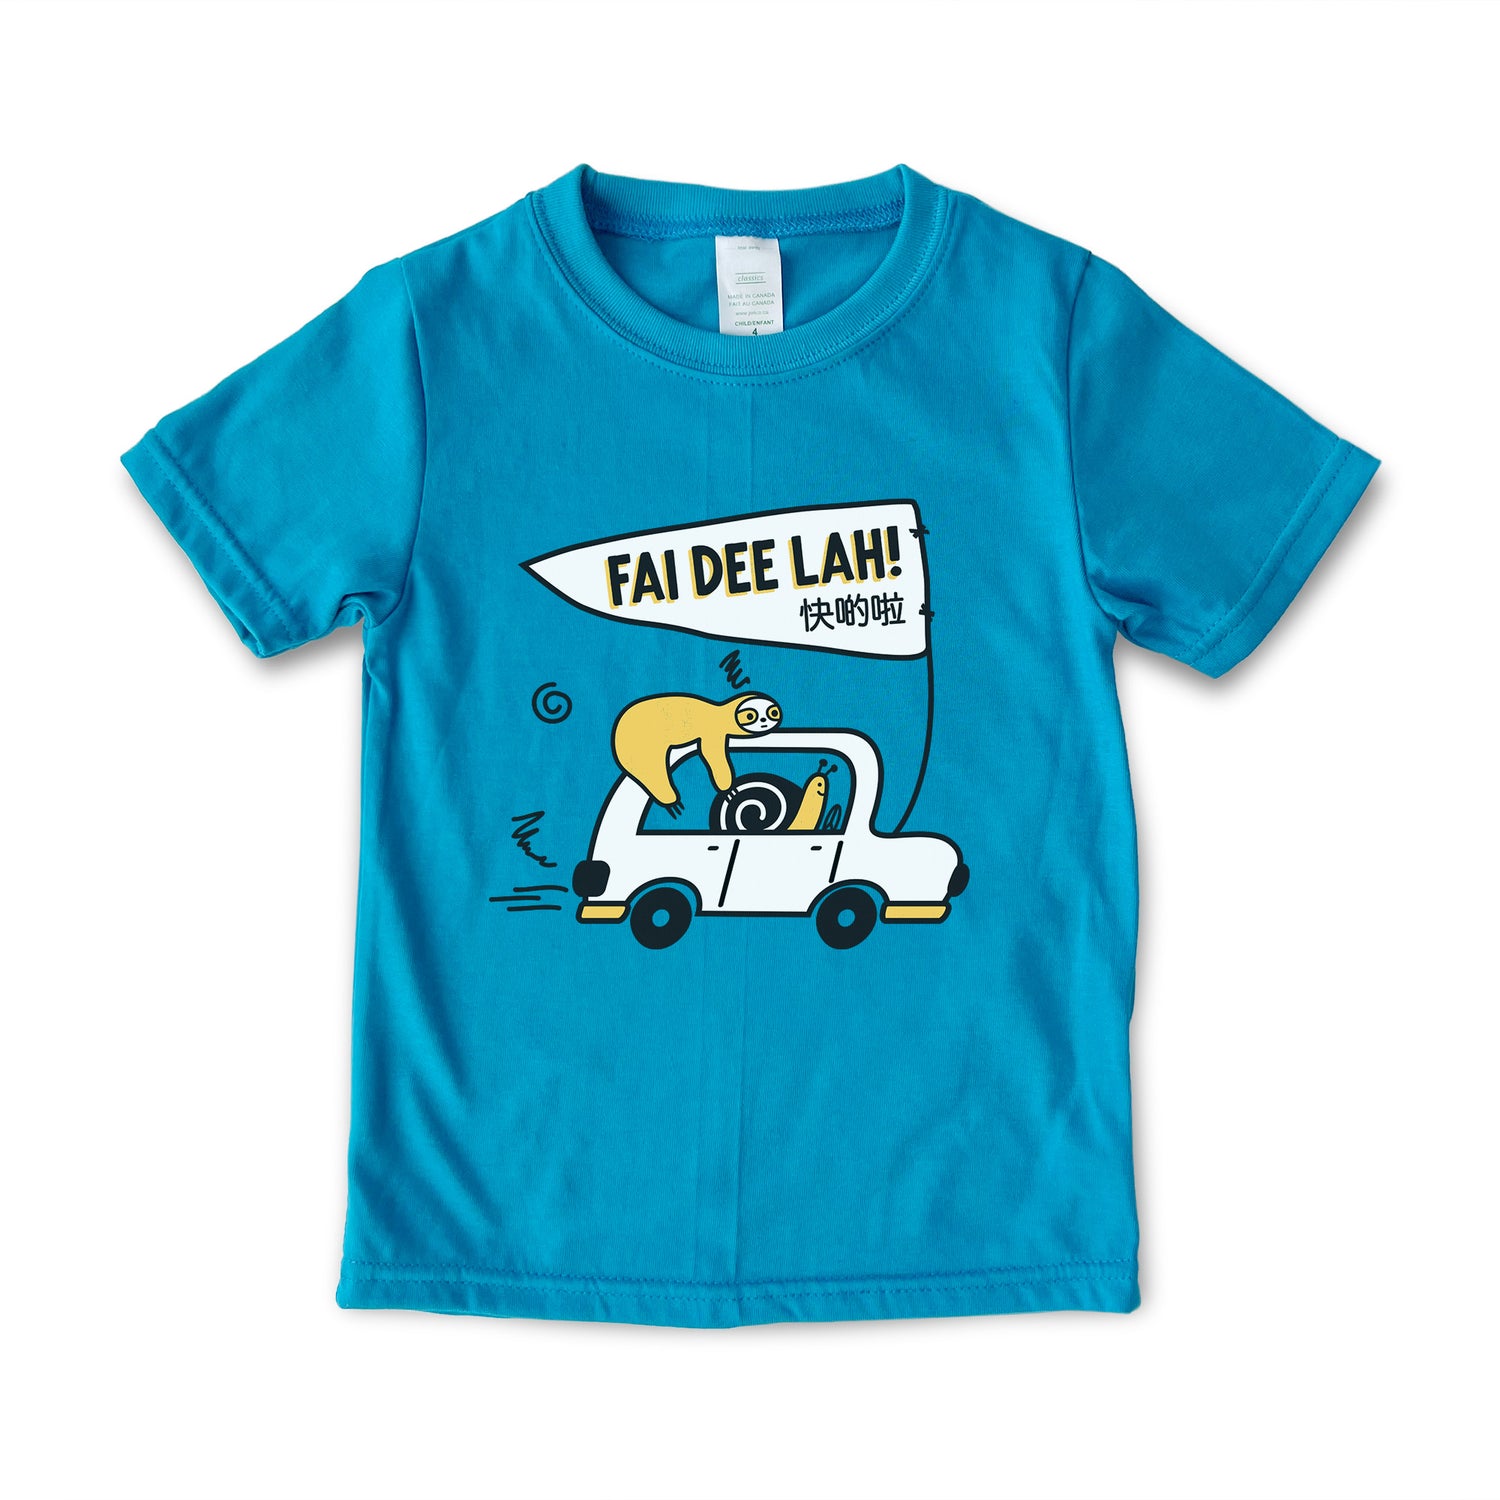 Fai dee lah cantonese kids t-shirt in teal by I&